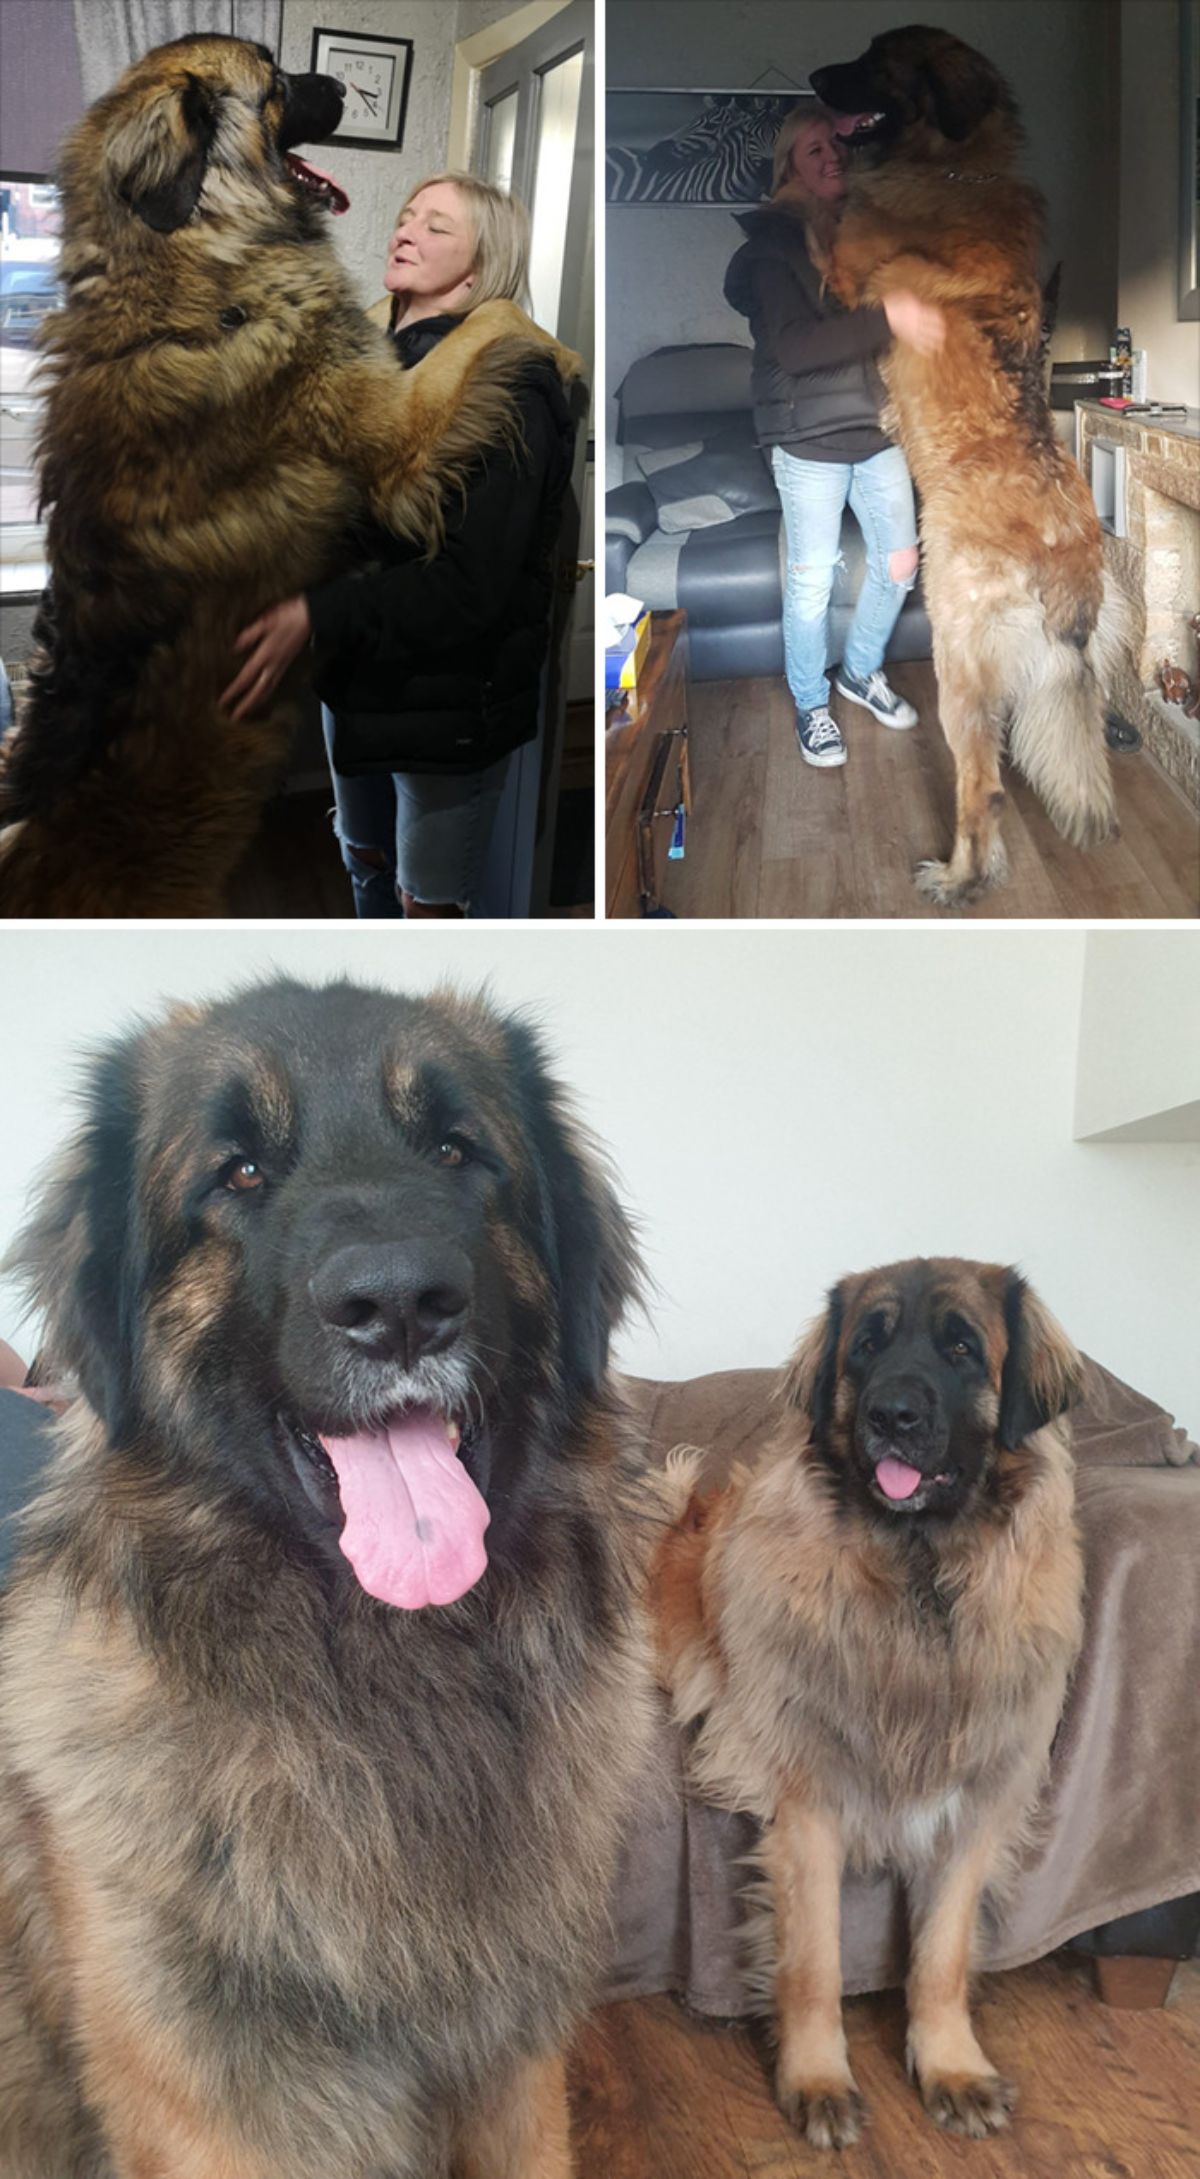 2 photos of brown and black fluffy dogs with a woman and 1 photo of the 2 fluffy dogs sitting together